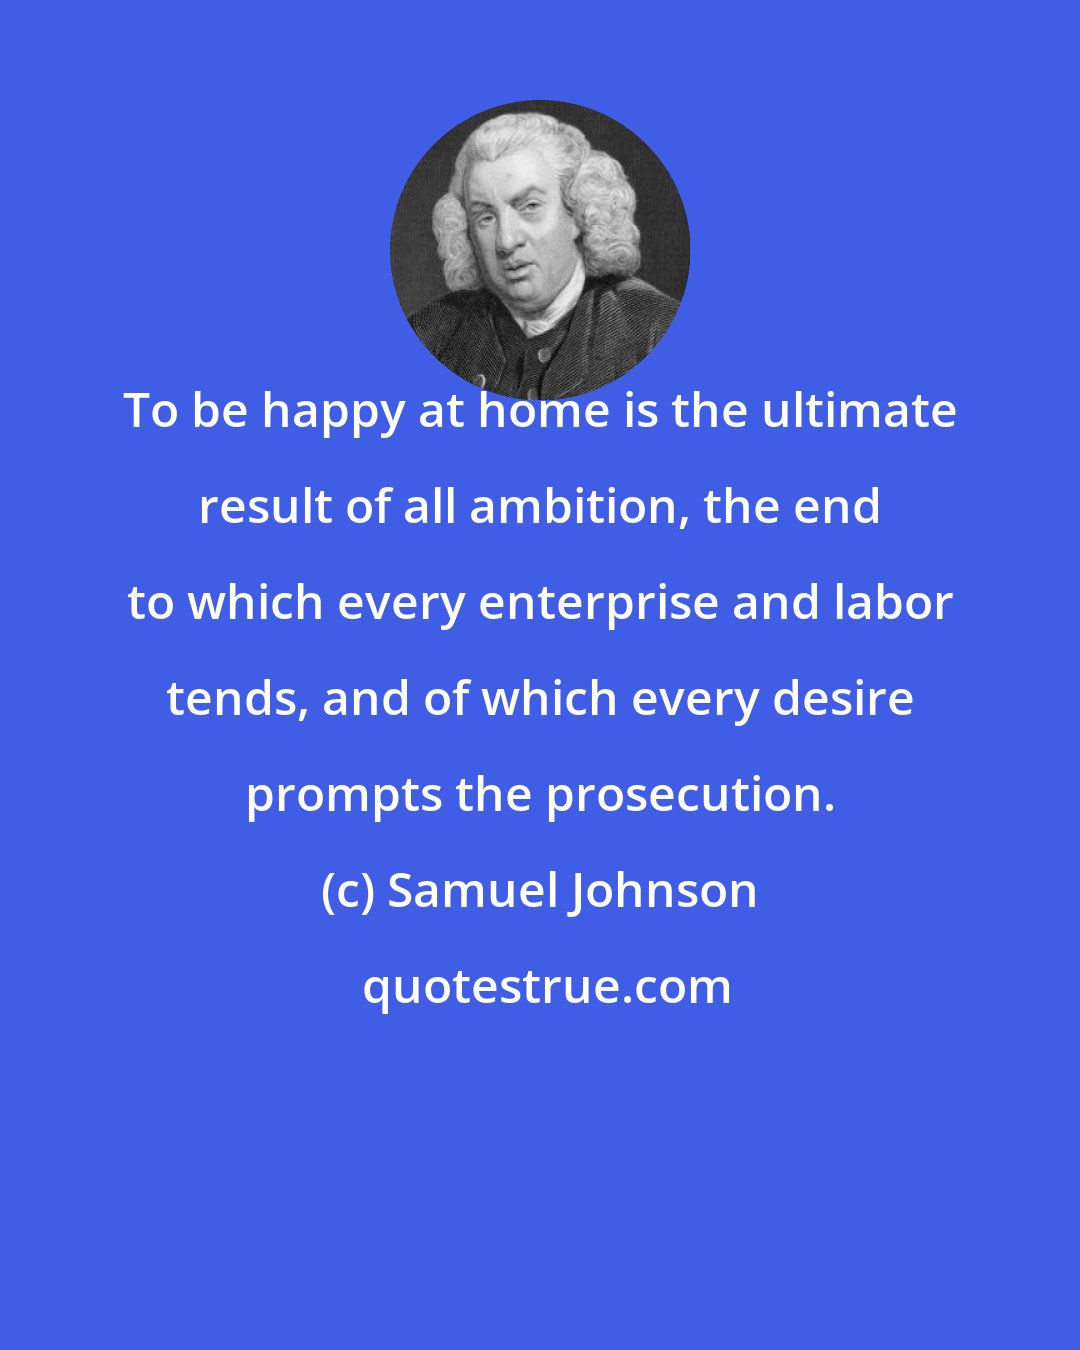 Samuel Johnson: To be happy at home is the ultimate result of all ambition, the end to which every enterprise and labor tends, and of which every desire prompts the prosecution.